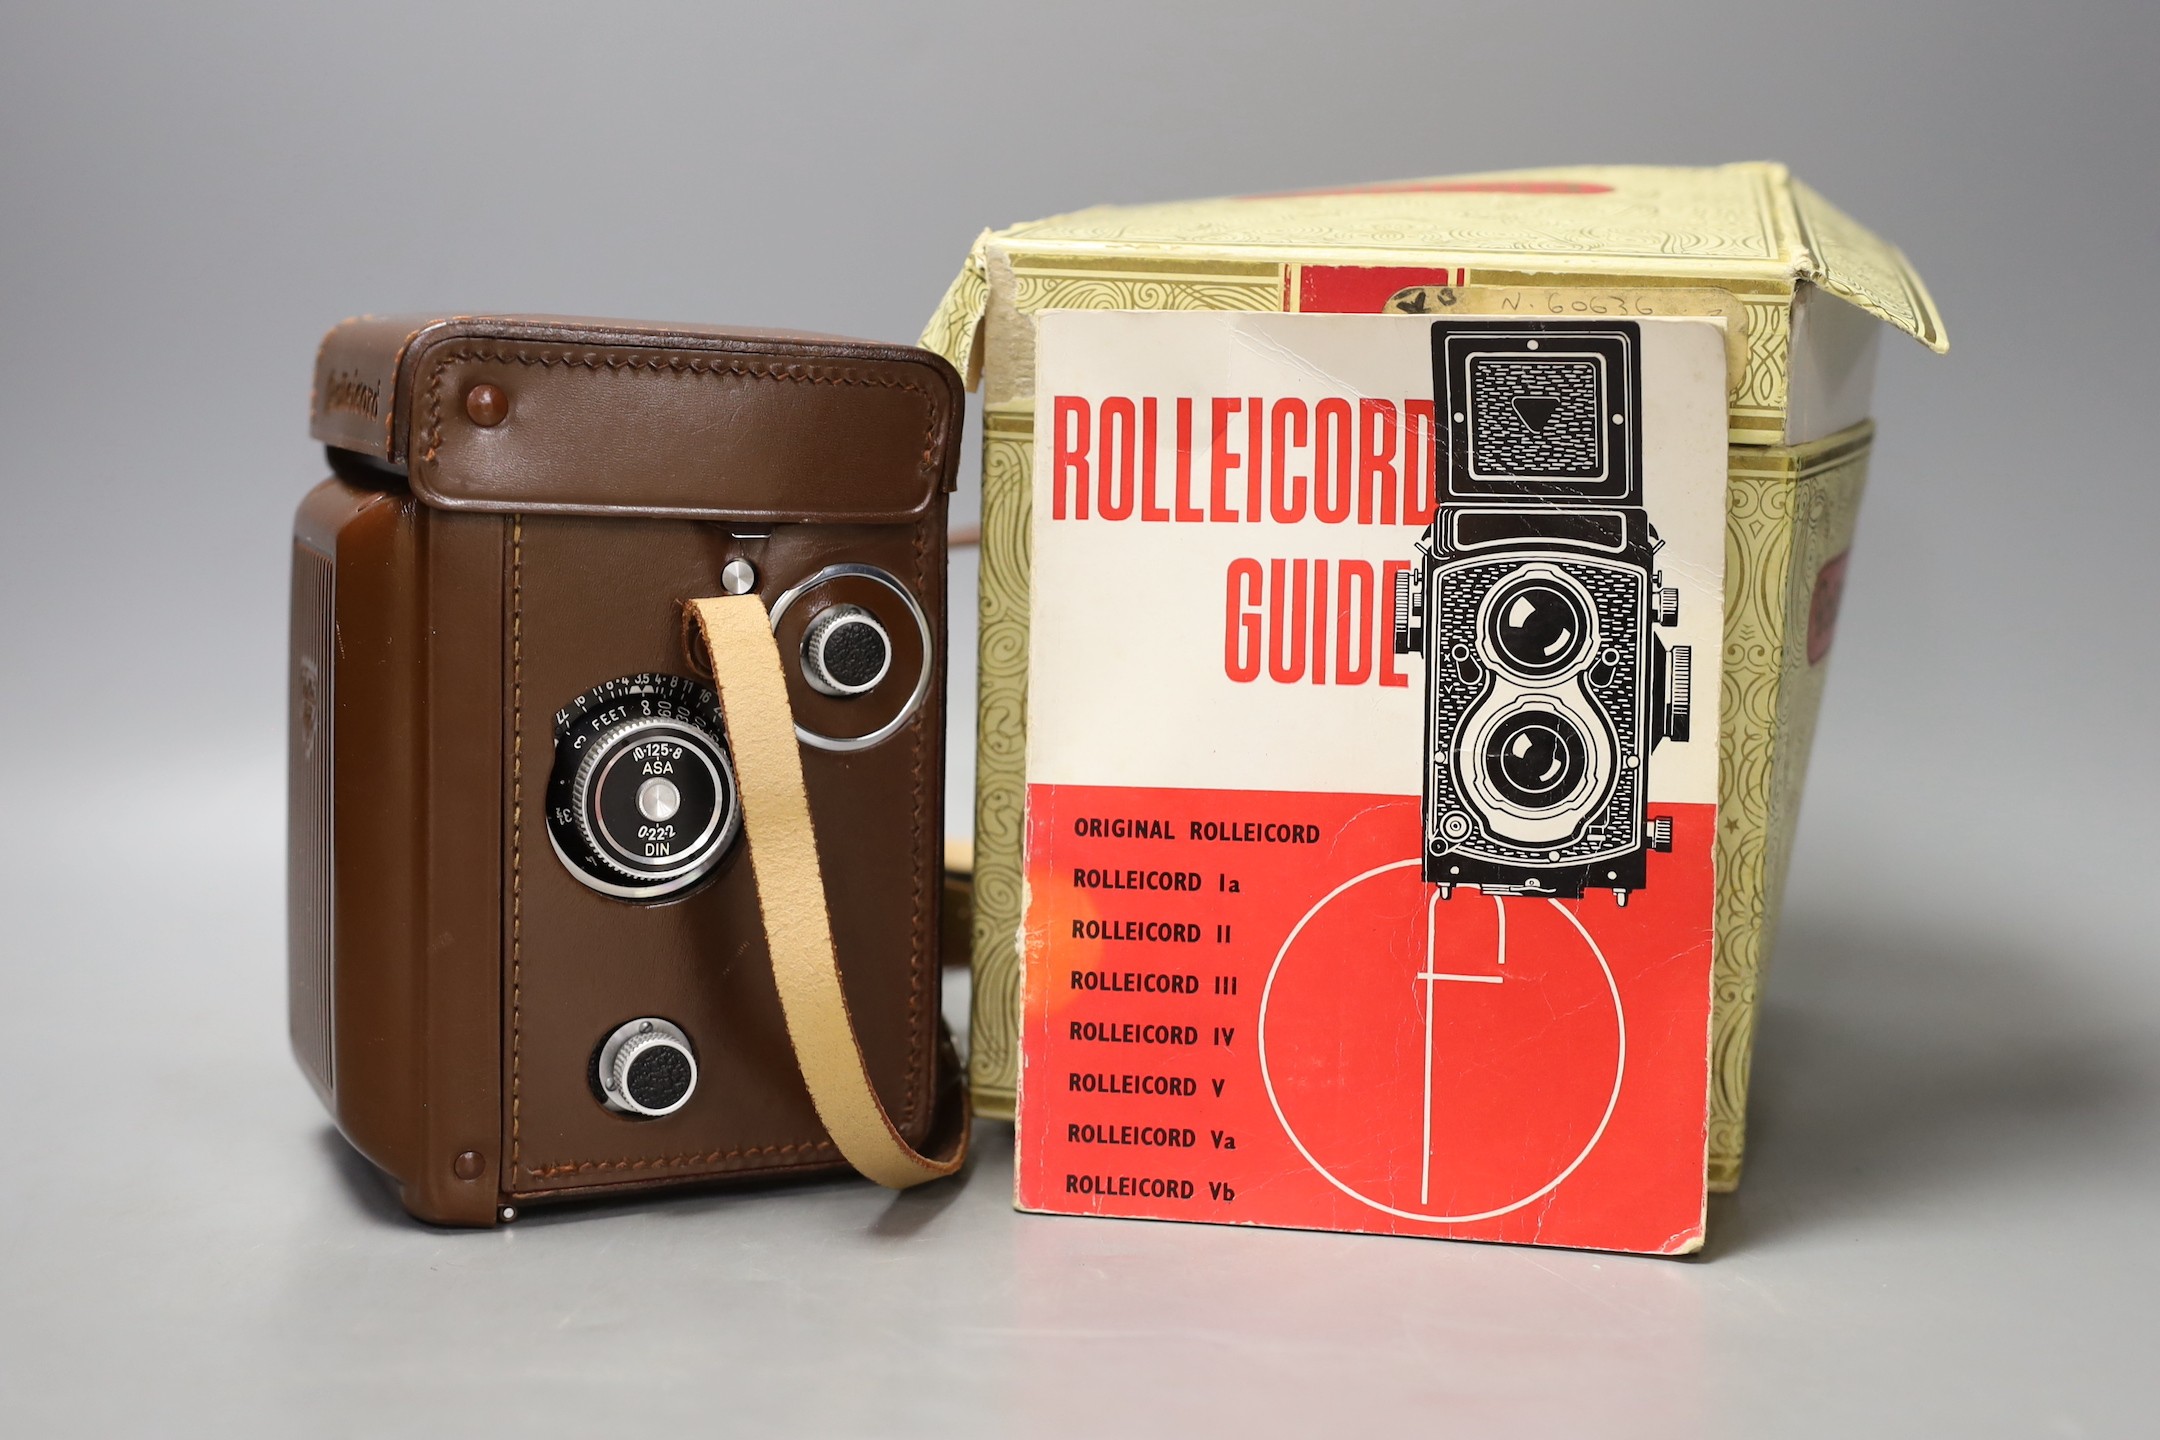 A Rolleicord Vb TLR Camera, serial no 2631352, with Schneider Kreuznach Xenar 75mm f/3.5 lens, leather case, paperwork and box